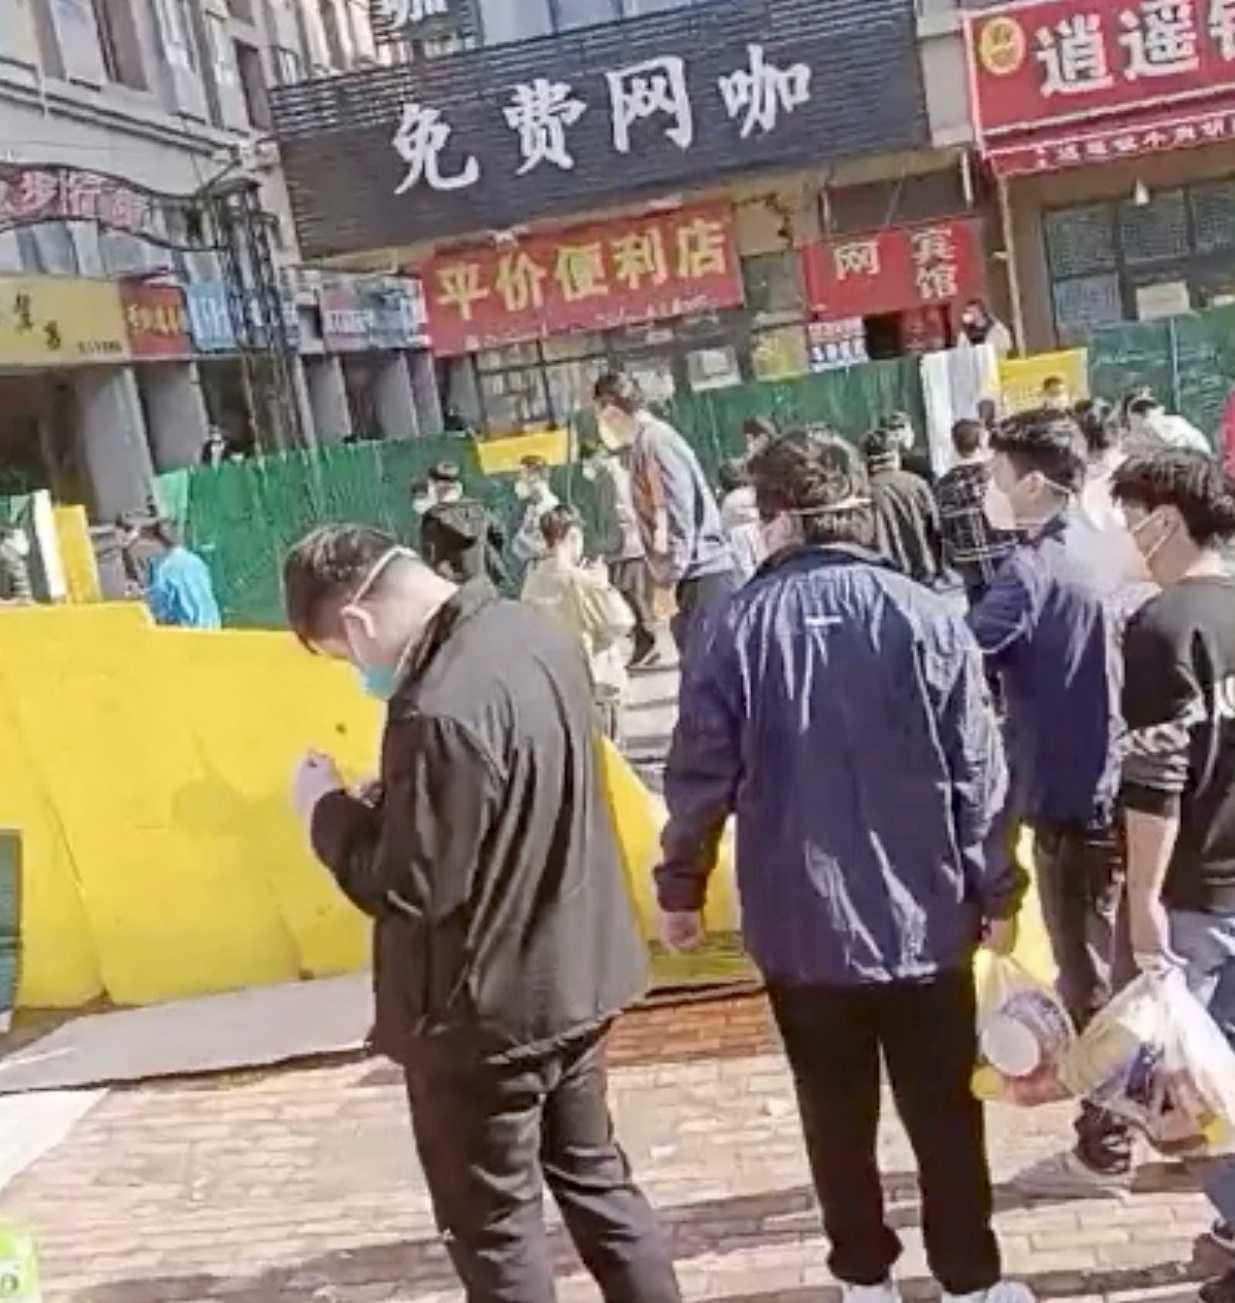 A group of people cross a downed fence following a protest at Foxconn's plant in Zhengzhou, China, in this screengrab obtained from a video released Nov 23. Photo: Reuters 